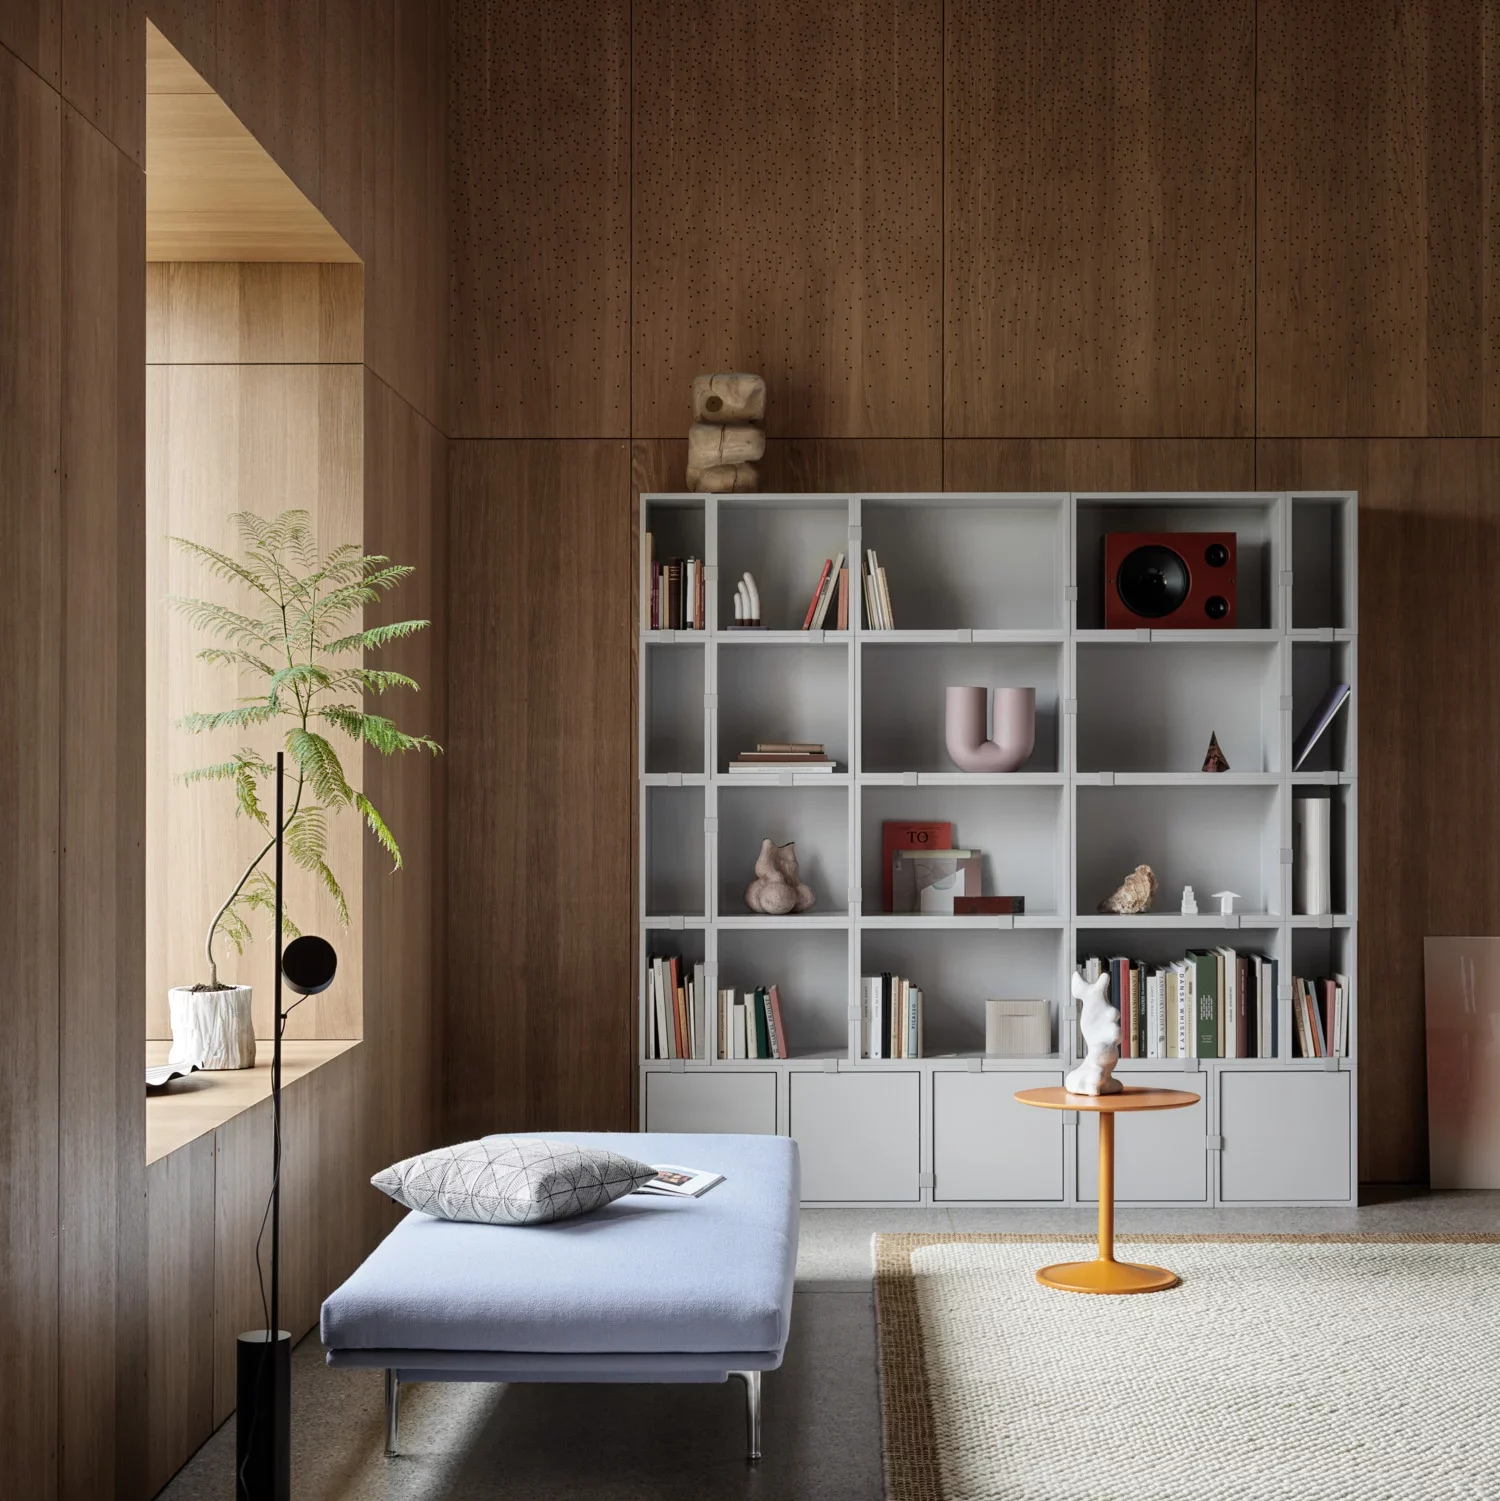 A sophisticated wooden bookshelf unit filled with assorted books and decor items against a wooden-paneled wall. In front lies a muted blue daybed with a cushion, next to a small orange side table.